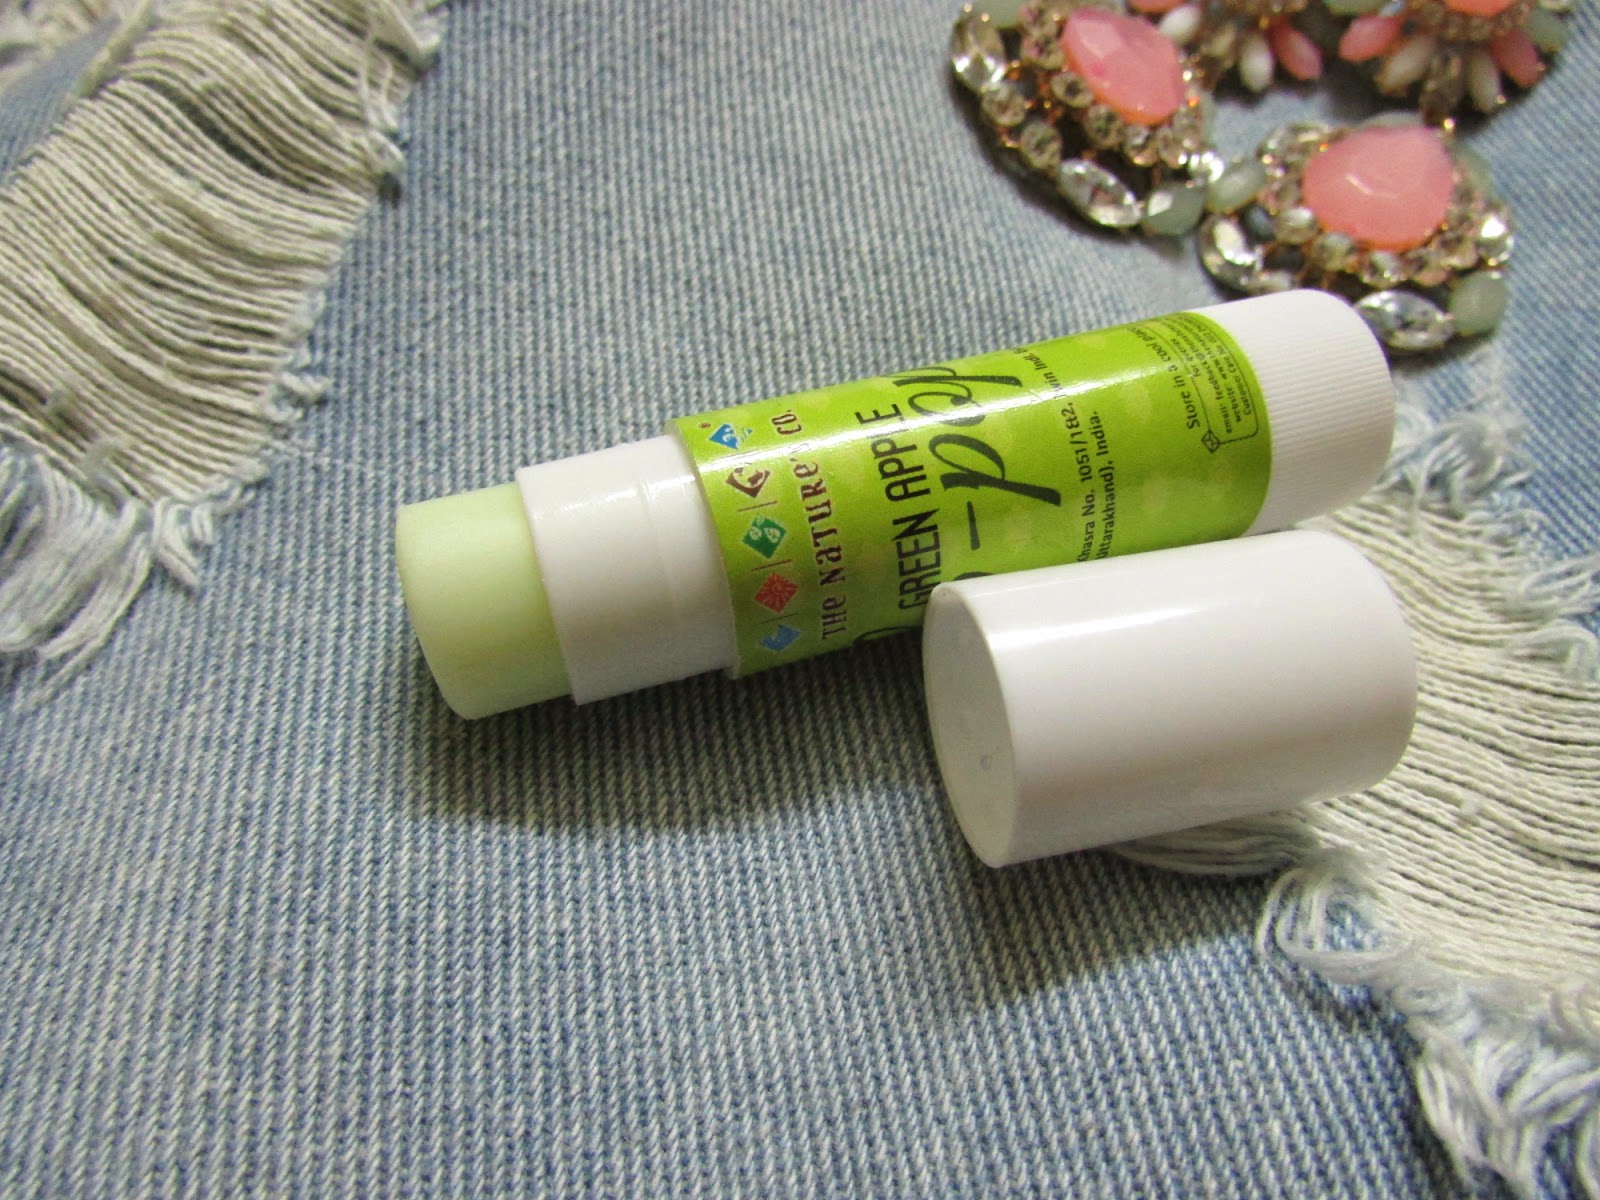 Natures Co Green Apple Lip Pop review, Natures Co Green Apple Lip Pop price, Natures Co Green Apple Lip Pop india online, Green Apple Lip Pop,all natural lip balm, paraben free lip balm, cruelty free lip balm, Natures Co Green Apple Lip Pop india, Natures Co Green Apple Lip Pop online, color less lip balm, flavoured lip balm, Natures co , natures co products , natures co product review, natures co india, natures co product review india, natures co products online, all natural products online, natures co prices, natures co lip butter , natures co lip butter price, natures co lip butter review, natures co lip butter price and review, natures co lip butter india, natures co lip butter online ,  natures co lip balm, natures co lip balm price, natures co lip balm review, natures co lip balm price and review, natures co lip balm india, natures co lip balm onlinenatures co chocolate mint lip butter , natures co chocolate mint lip butter price, natures co chocolate mint lip butter review, natures co chocolate mint lip butter price and review, natures co chocolate mint lip butter india, natures co chocolate mint lip butter online ,  natures co chocolate mint lip balm, natures co chocolate mint lip balm price, natures co chocolate mint lip balm review, natures co chocolate mint lip balm price and review, natures co chocolate mint lip balm india, natures co lip balm online, beauty , fashion,beauty and fashion,beauty blog, fashion blog , indian beauty blog,indian fashion blog, beauty and fashion blog, indian beauty and fashion blog, indian bloggers, indian beauty bloggers, indian fashion bloggers,indian bloggers online, top 10 indian bloggers, top indian bloggers,top 10 fashion bloggers, indian bloggers on blogspot,home remedies, how to